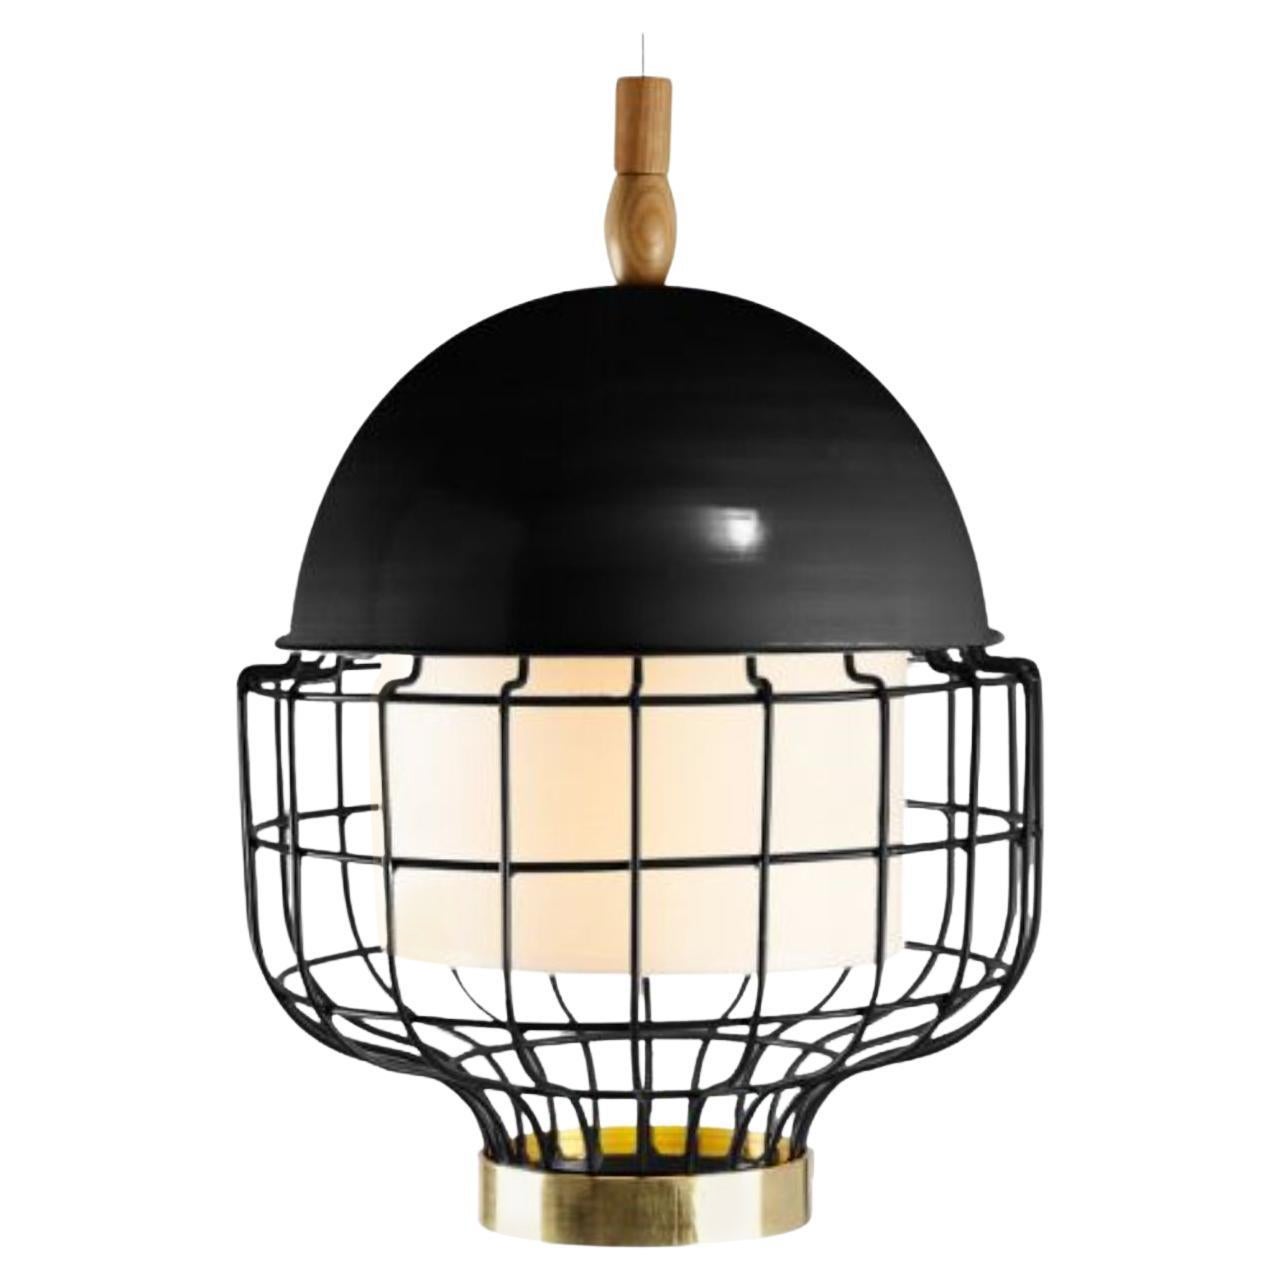 Black Magnolia III Suspension Lamp with Brass Ring by Dooq